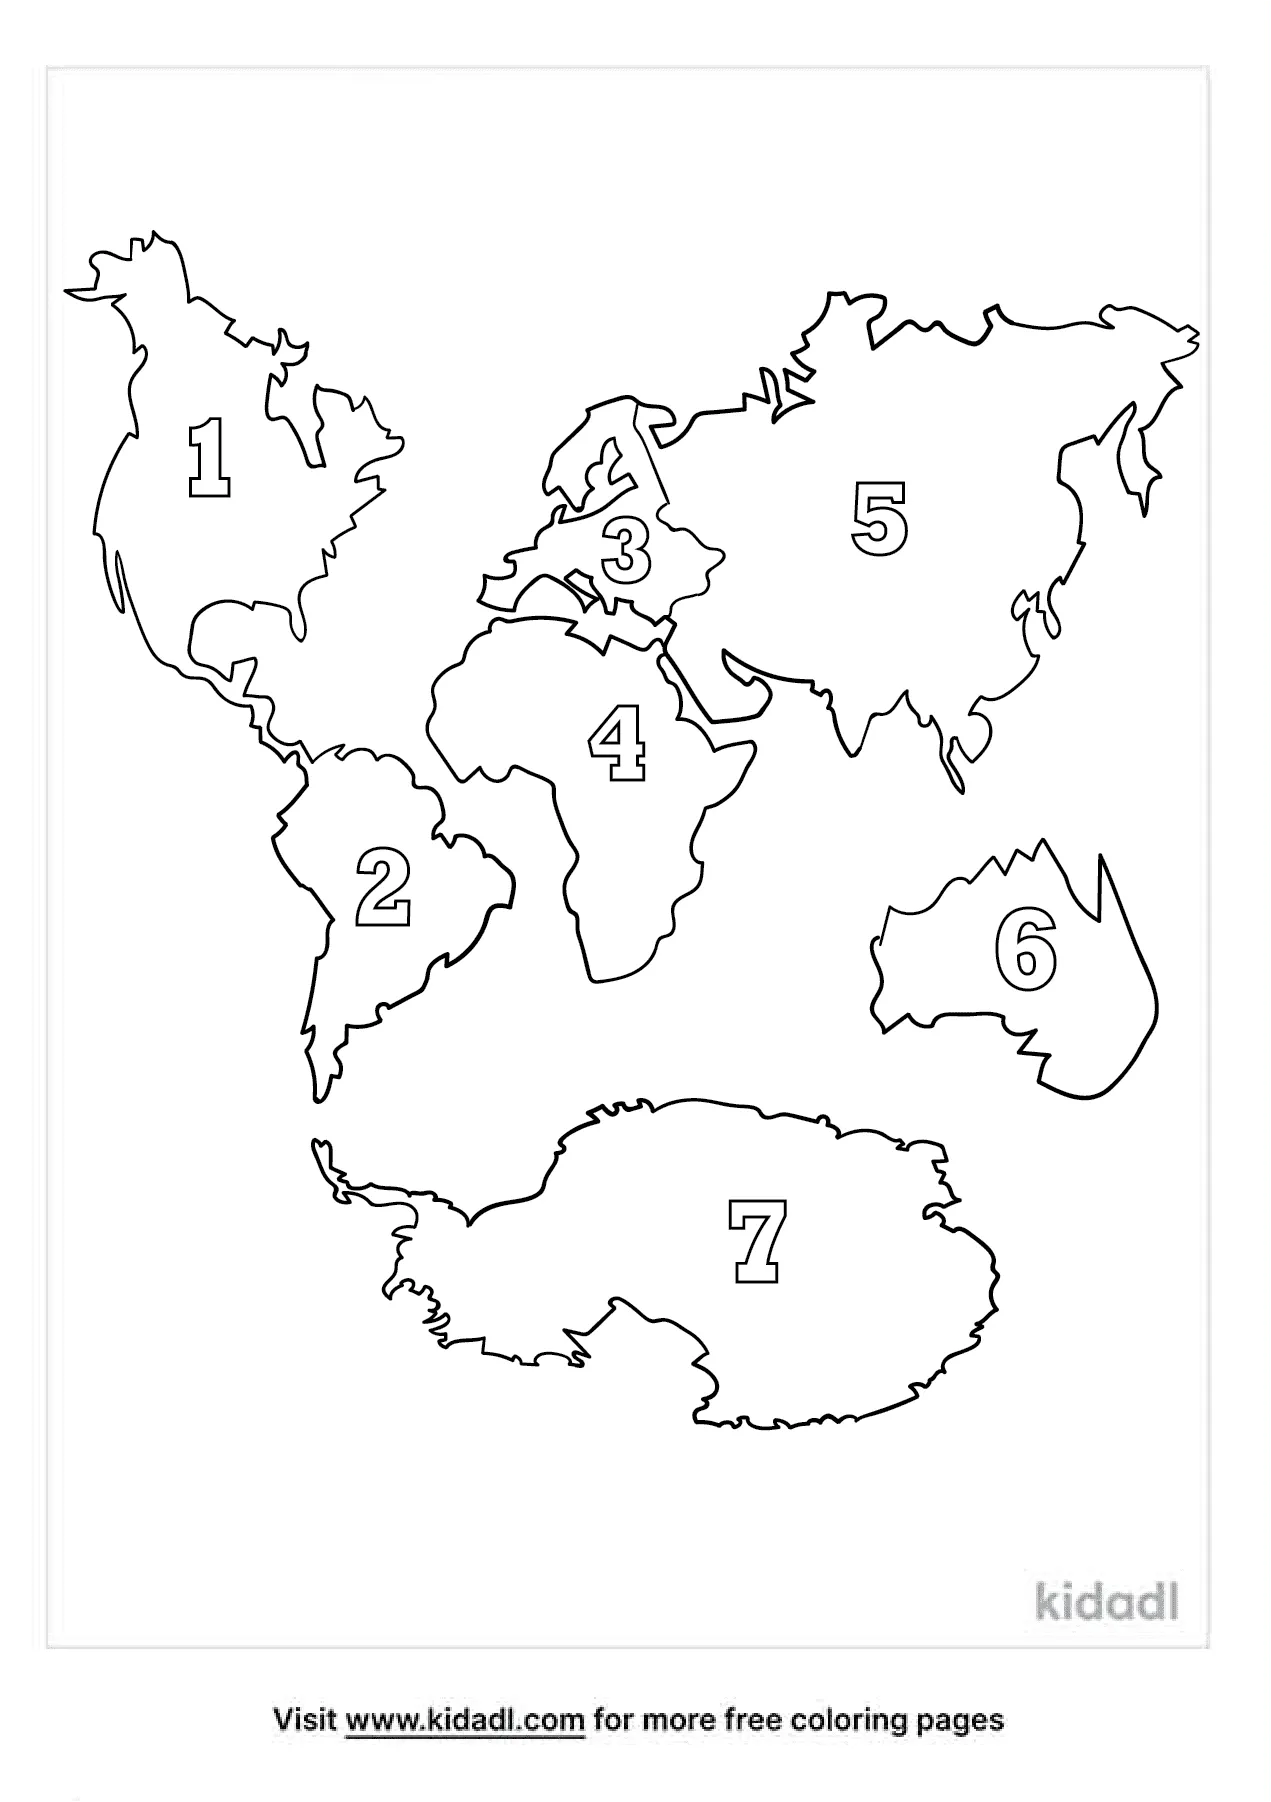 continent coloring pages free